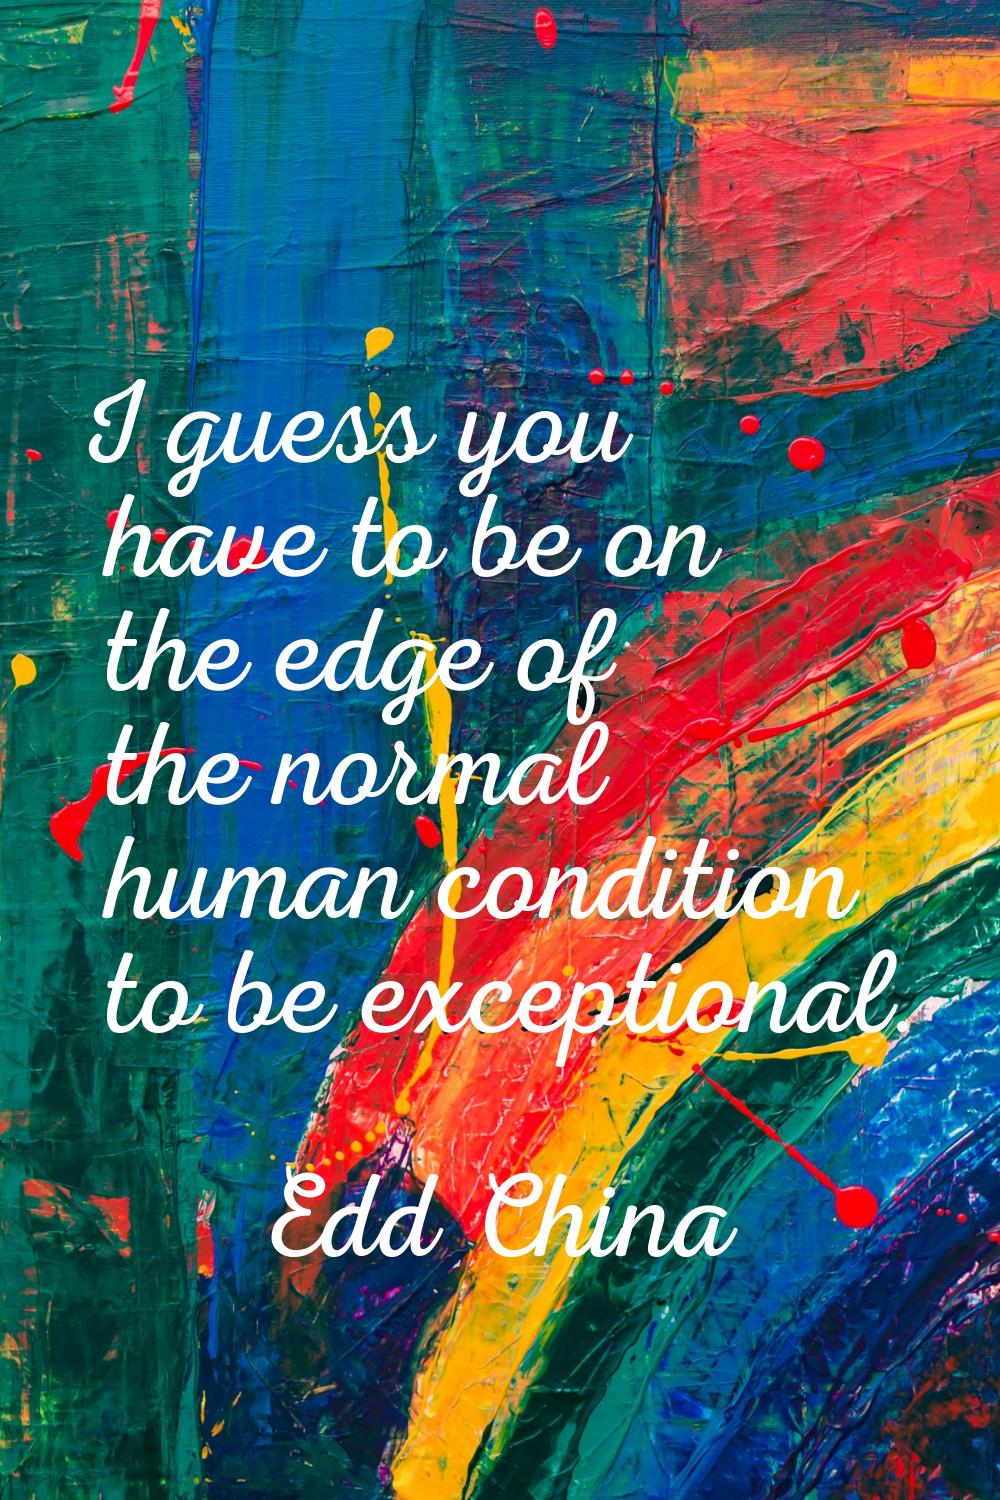 I guess you have to be on the edge of the normal human condition to be exceptional.